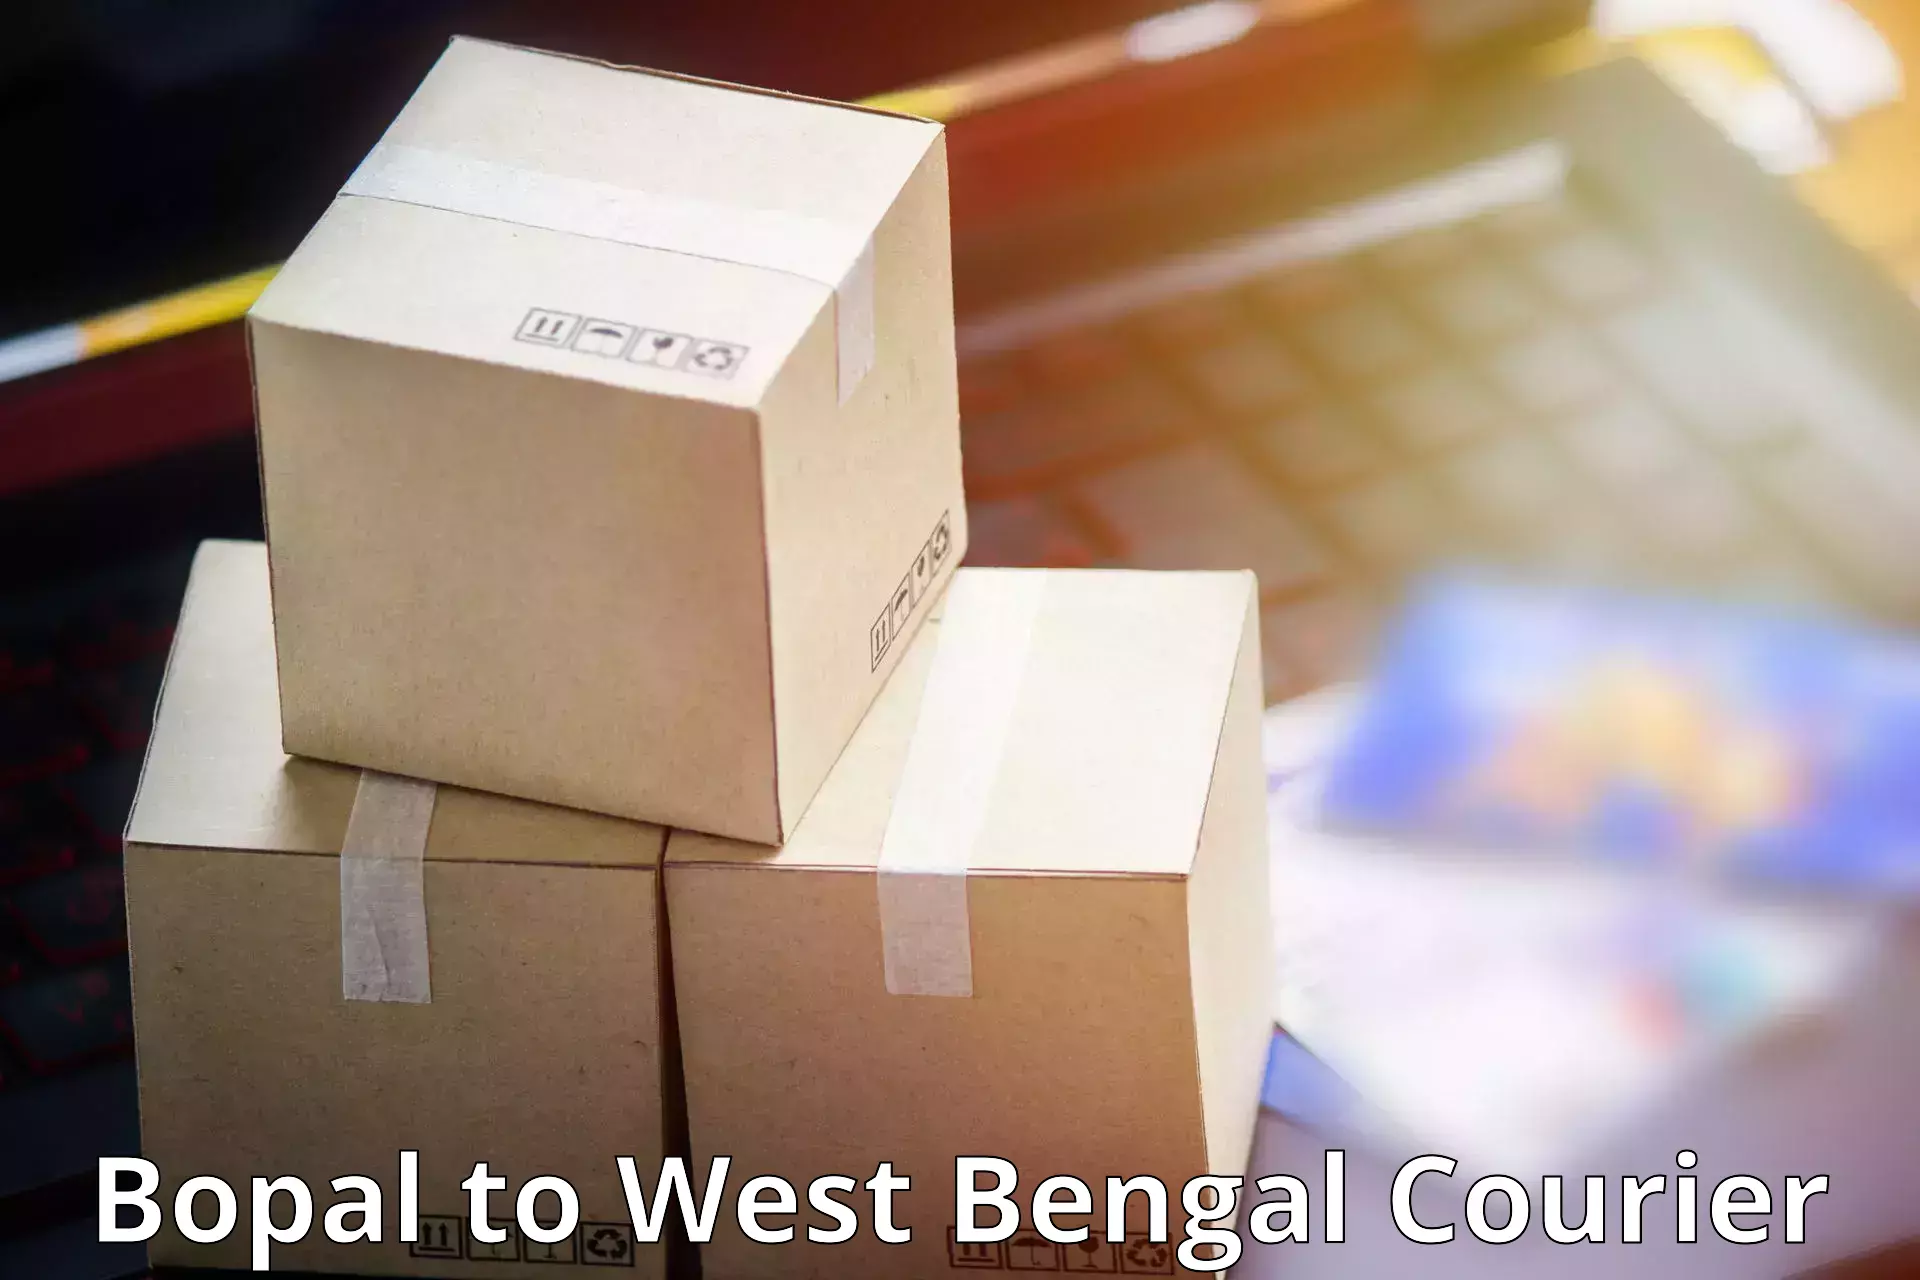 Courier service partnerships Bopal to Howrah